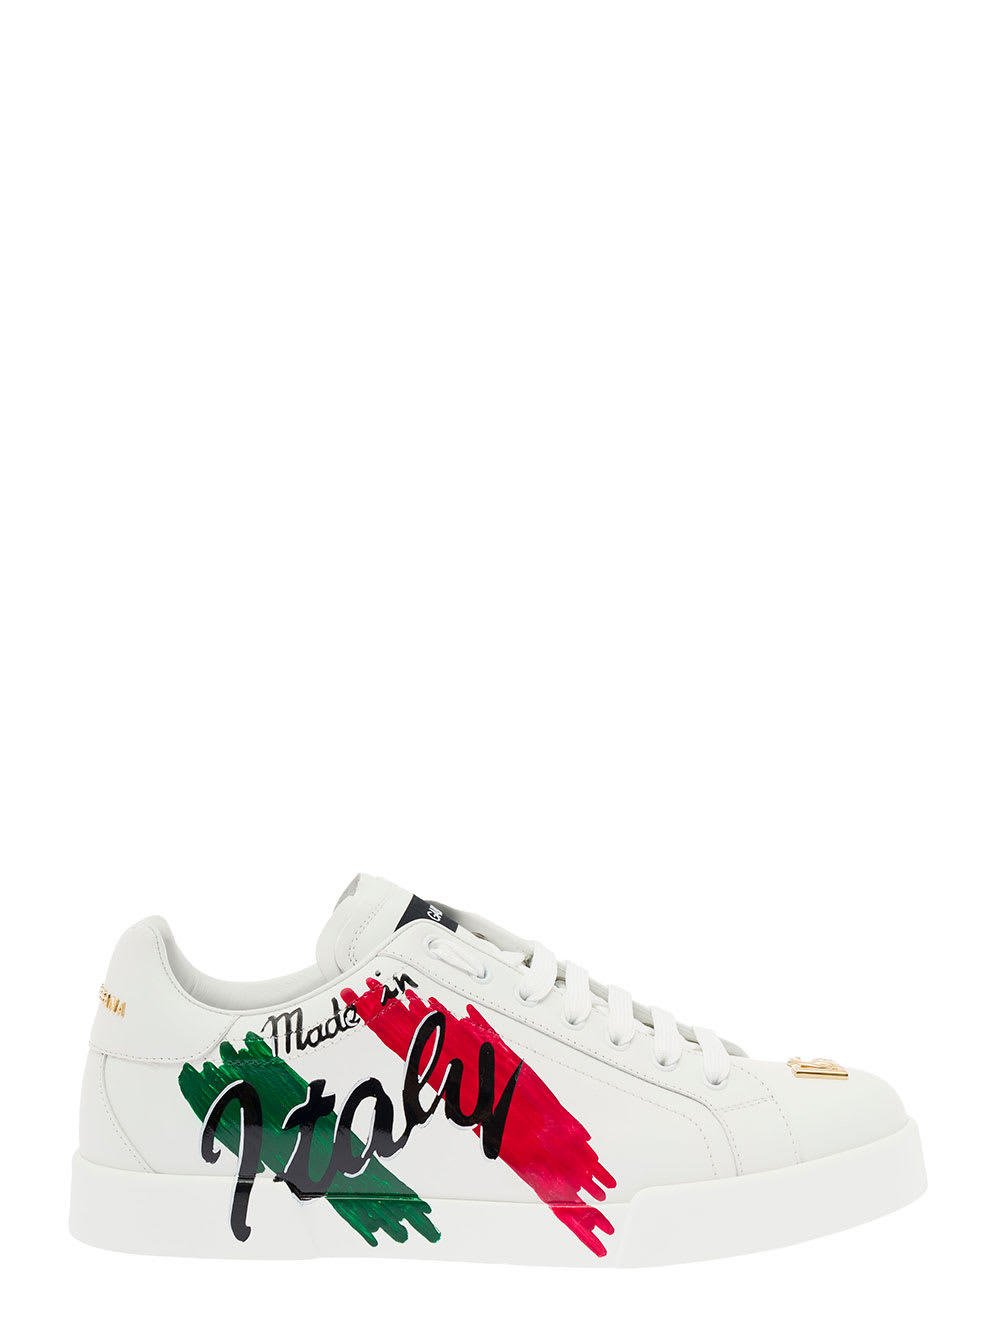 Dolce & Gabbana Mans White Leather Sneakers With Made In Italy Print